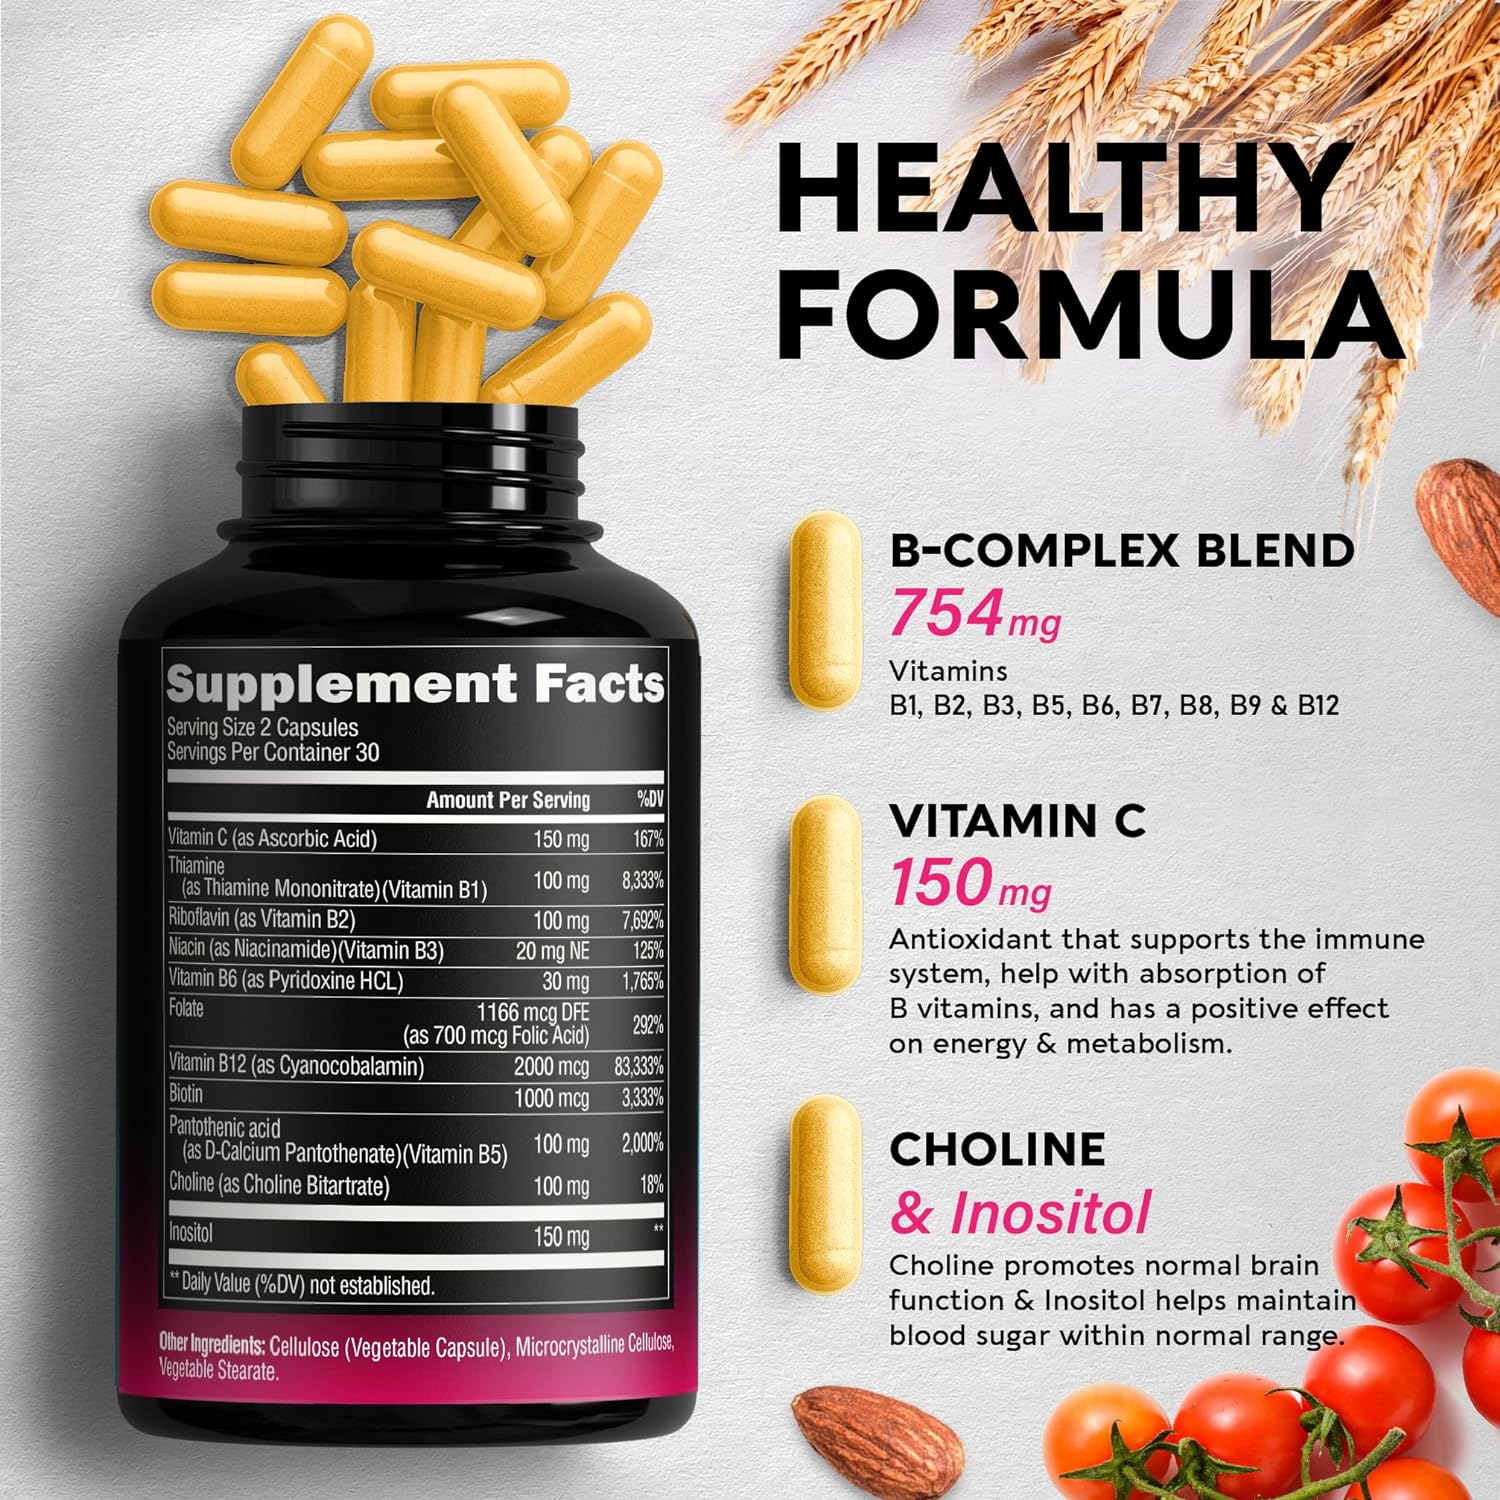 Vitamin B Complex - 11-in-1 B-Complex: B1, B2, B3, B5, B6, B7, B8, B9, B12 with Vitamin C, Choline, Inositol - Made in USA - Energy, Brain  Heart Support Supplements - 754 mg - 60 Vegan Capsules